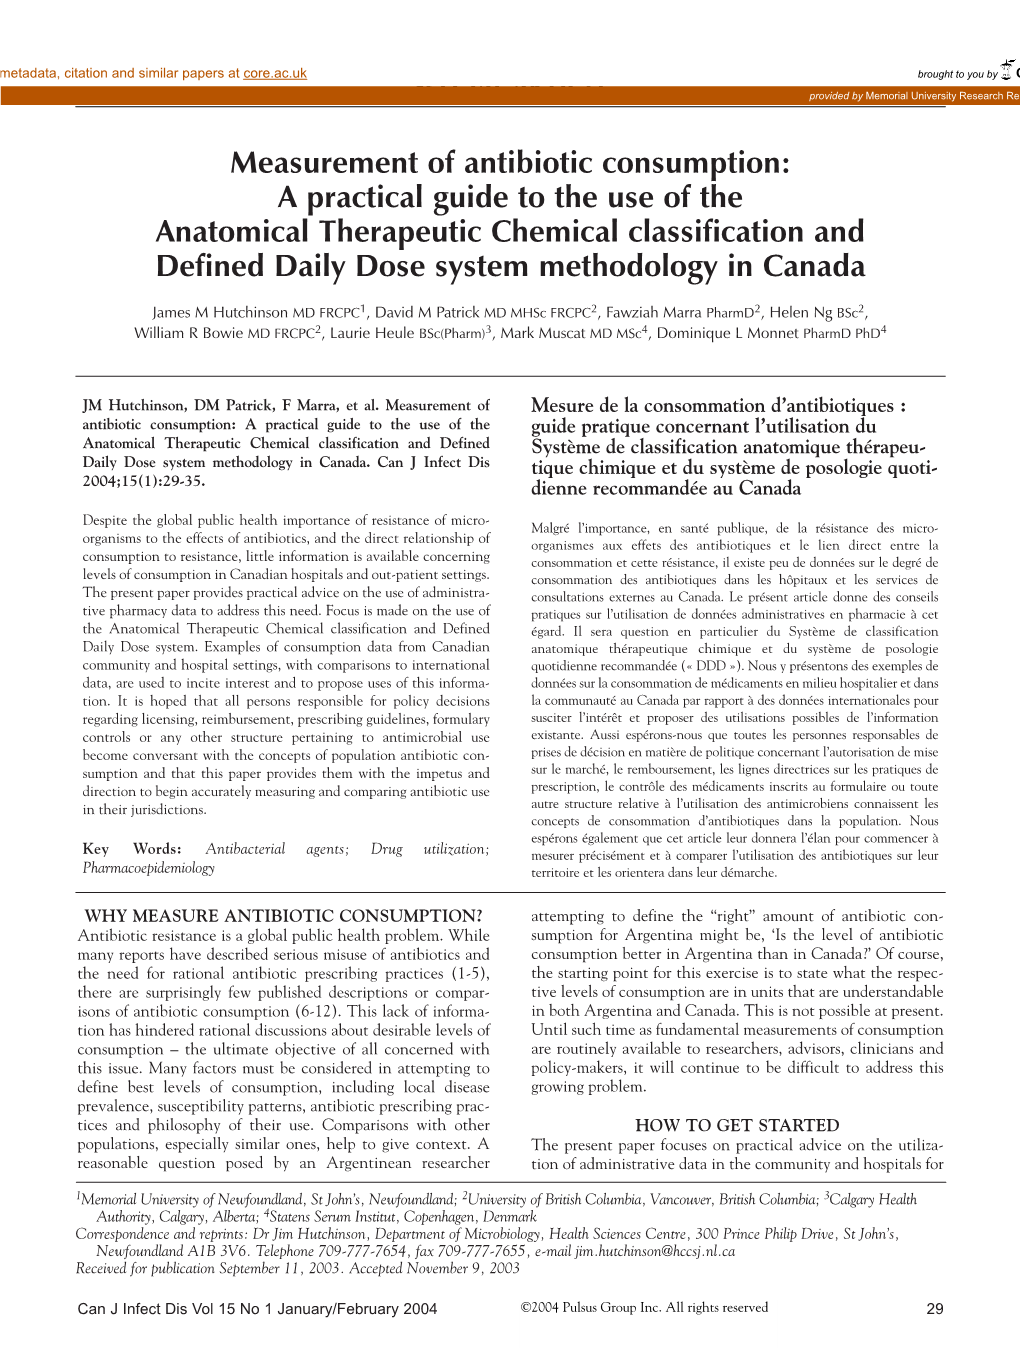 A Practical Guide to the Use of the Anatomical Therapeutic Chemical Classification and Defined Daily Dose System Methodology in Canada